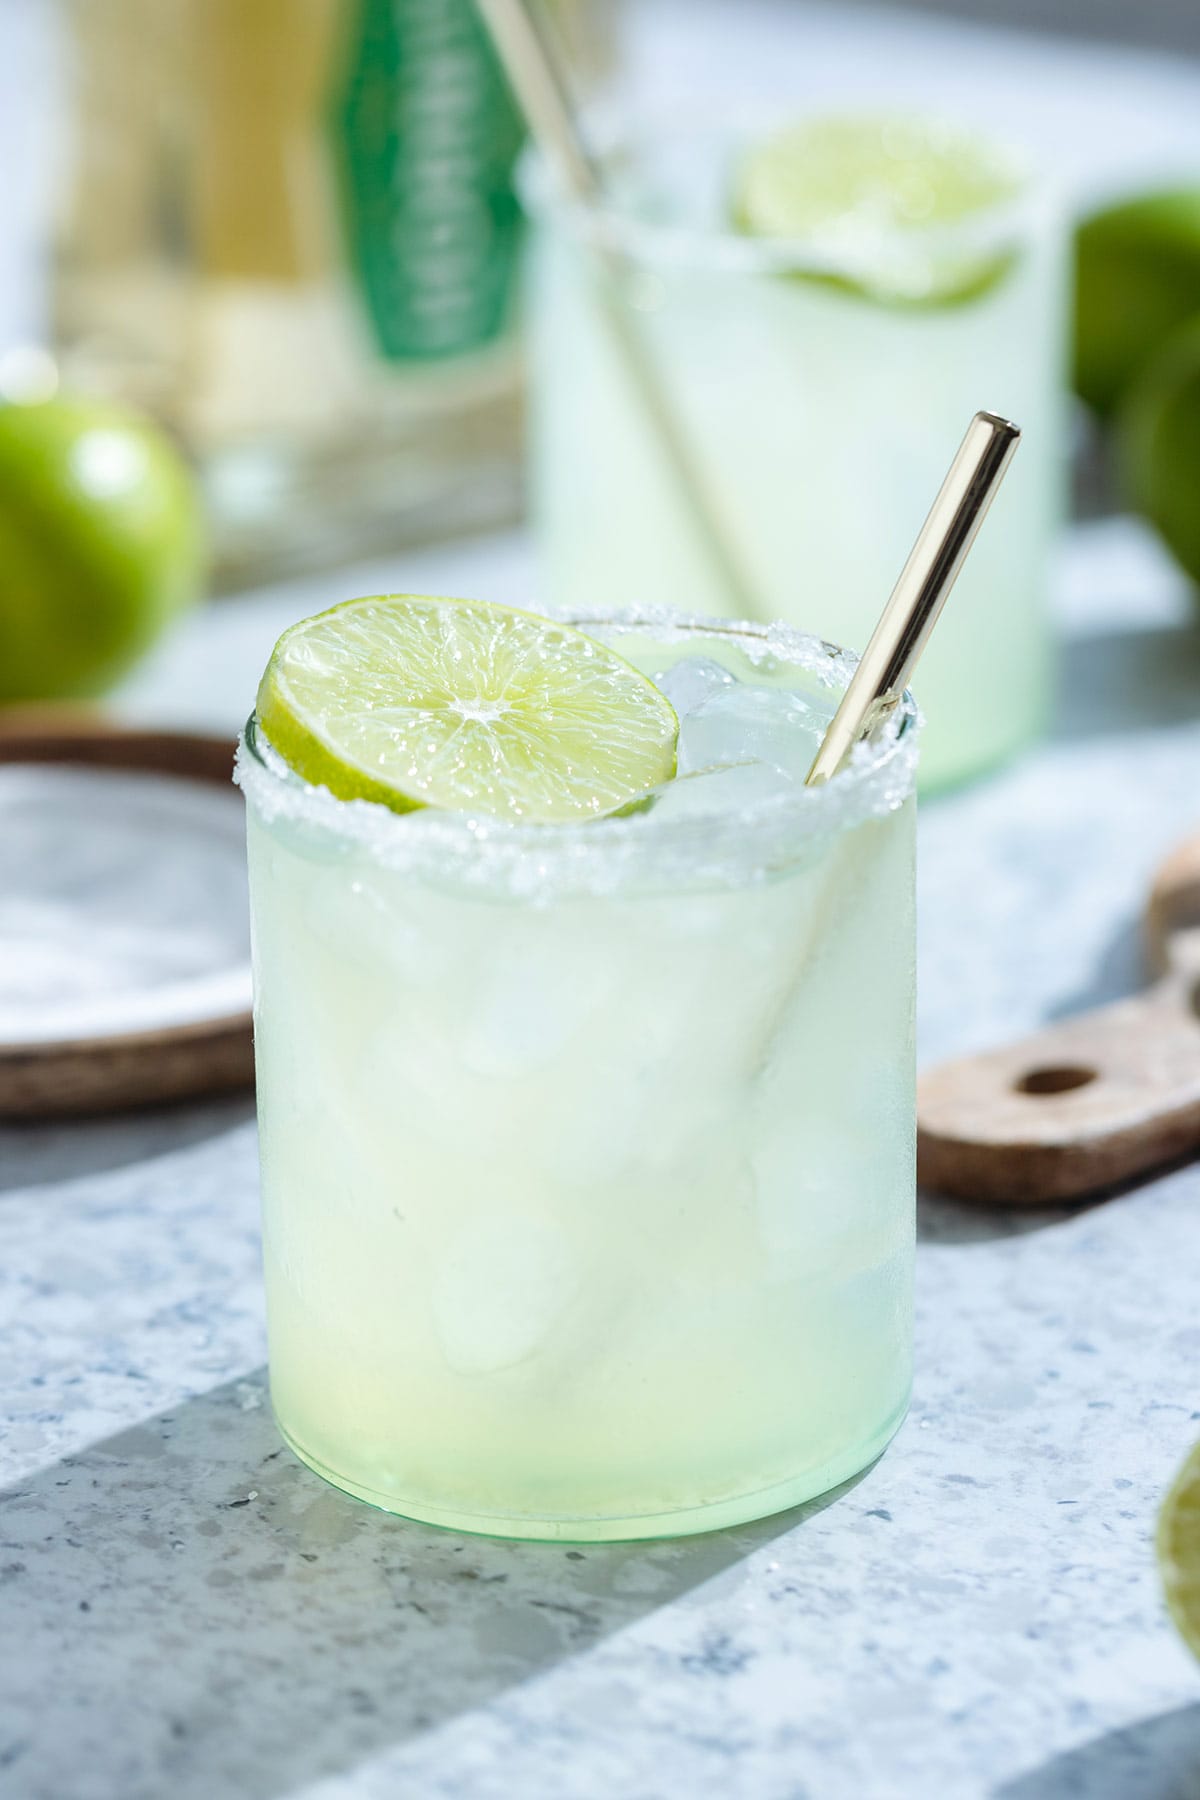 Classic margarita in a short glass with a golden straw garnished a slice of lime.